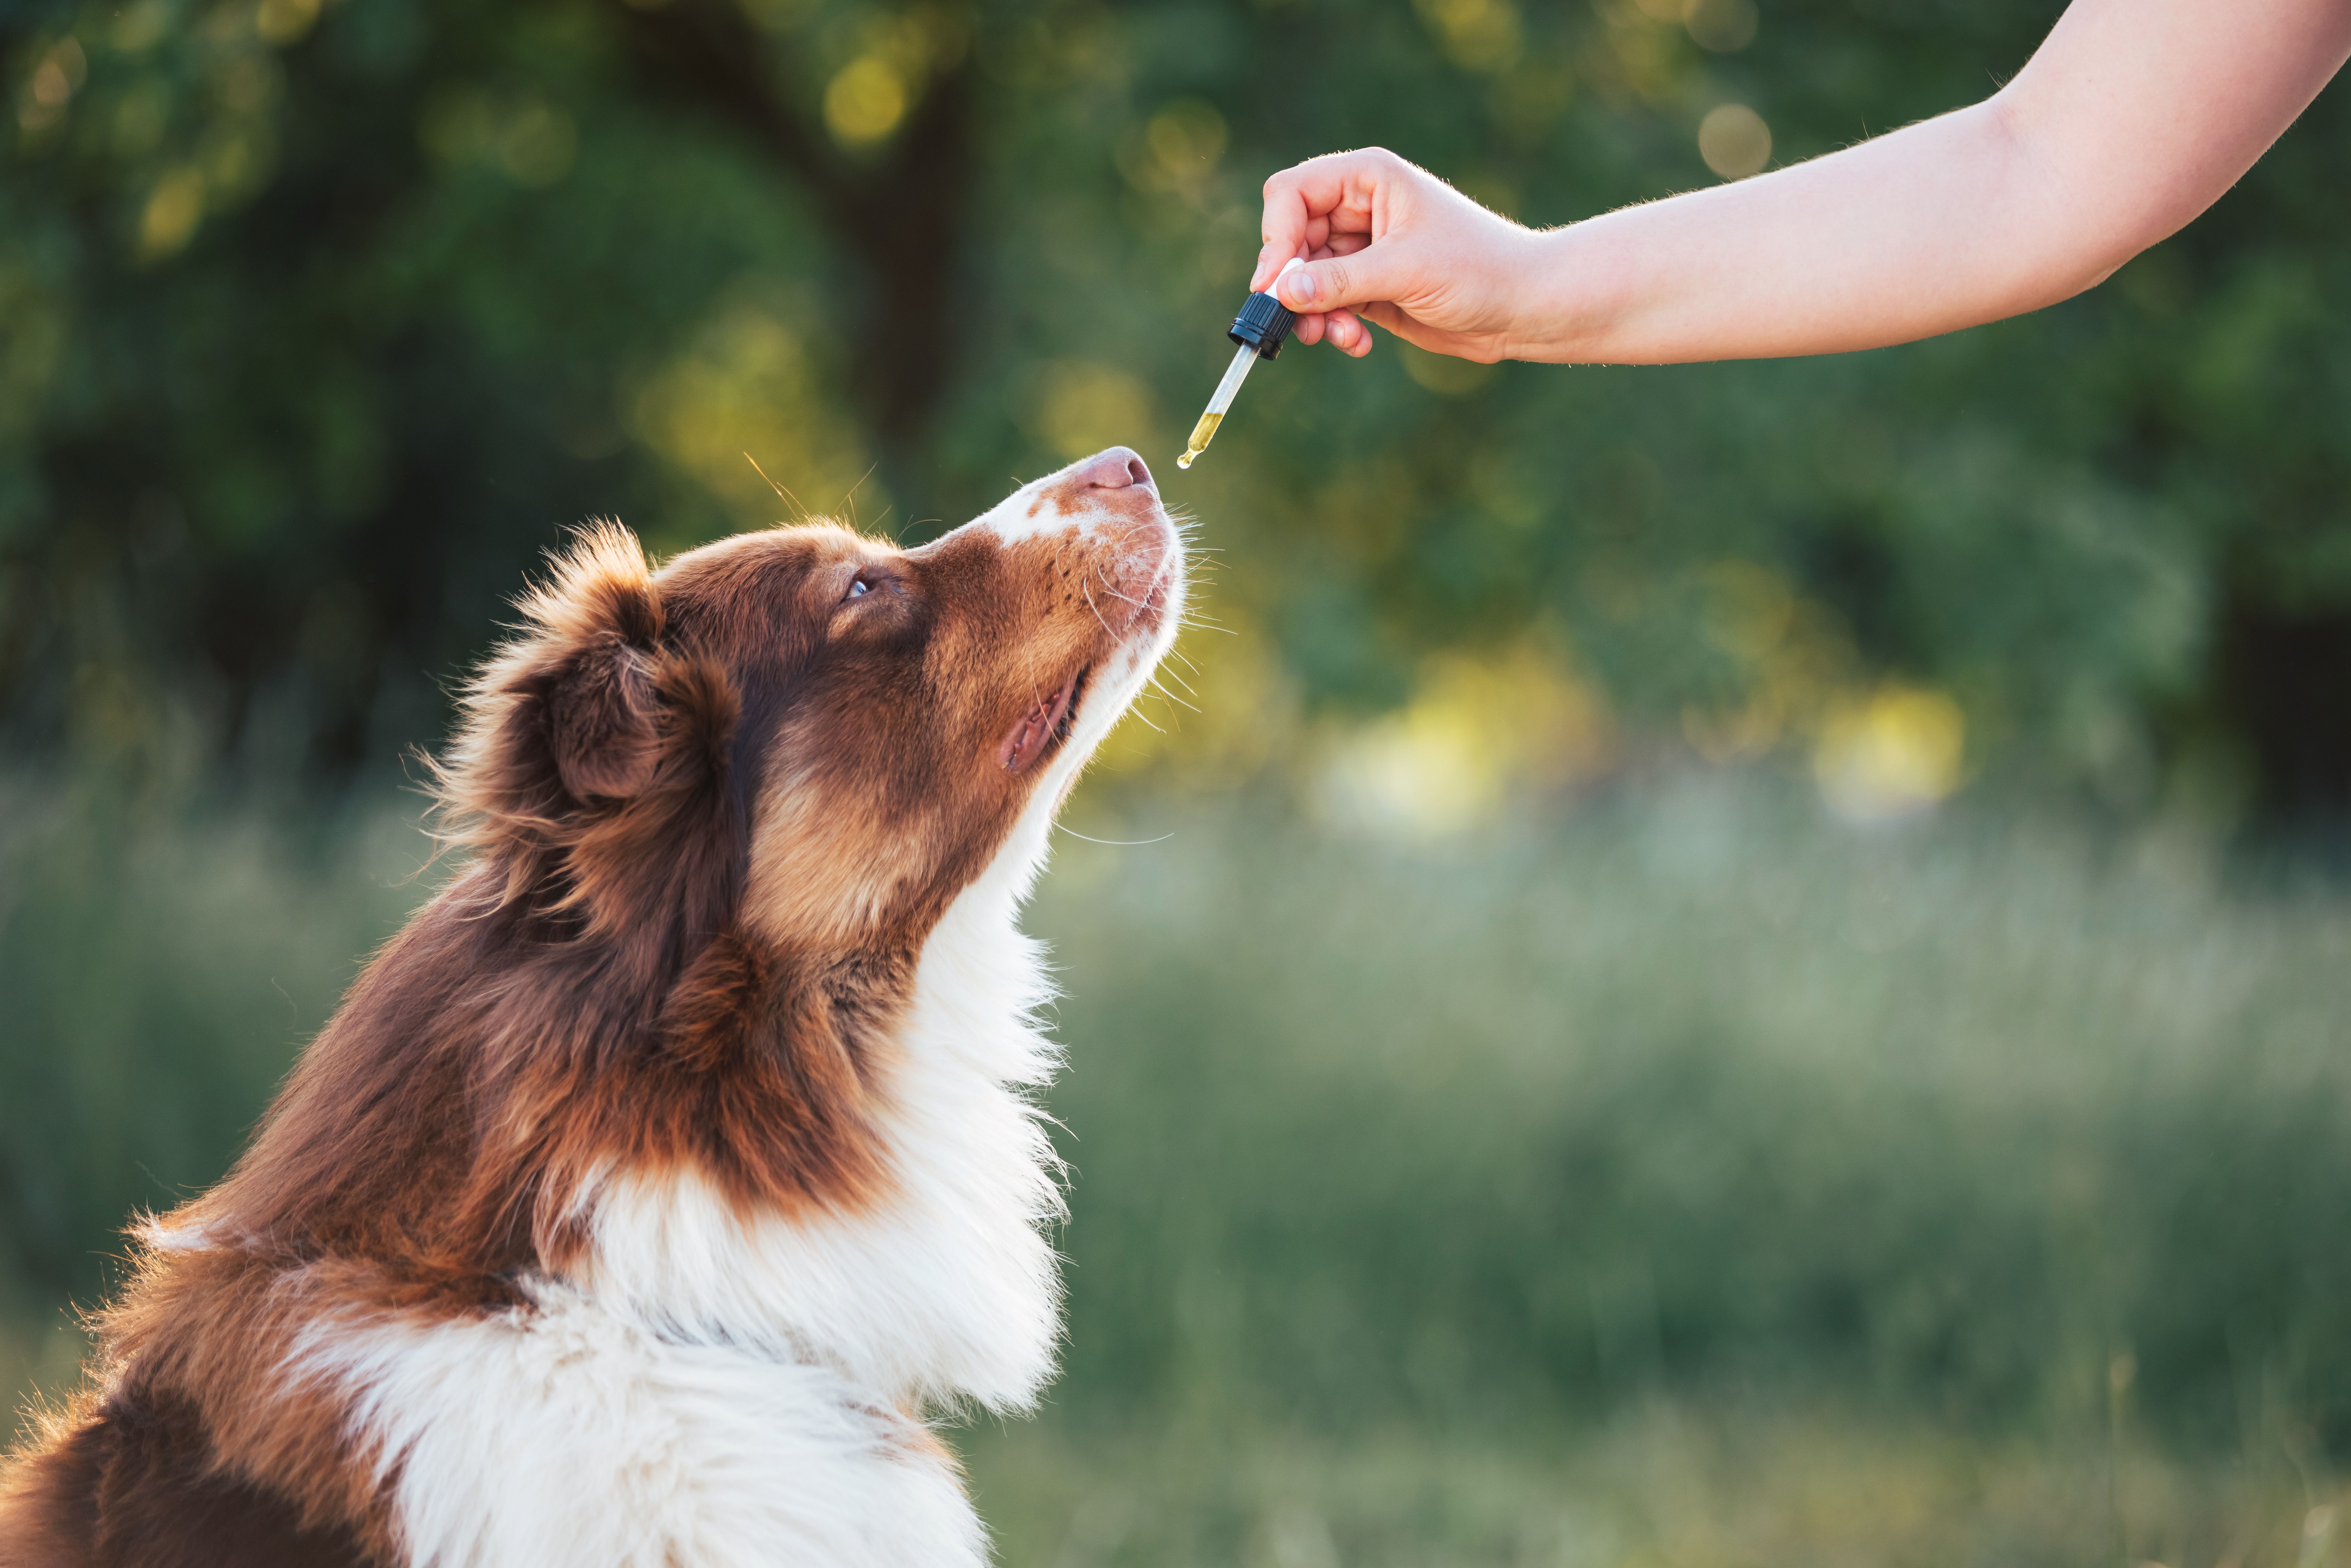 New study reveals CBD is effective at reducing canine stress